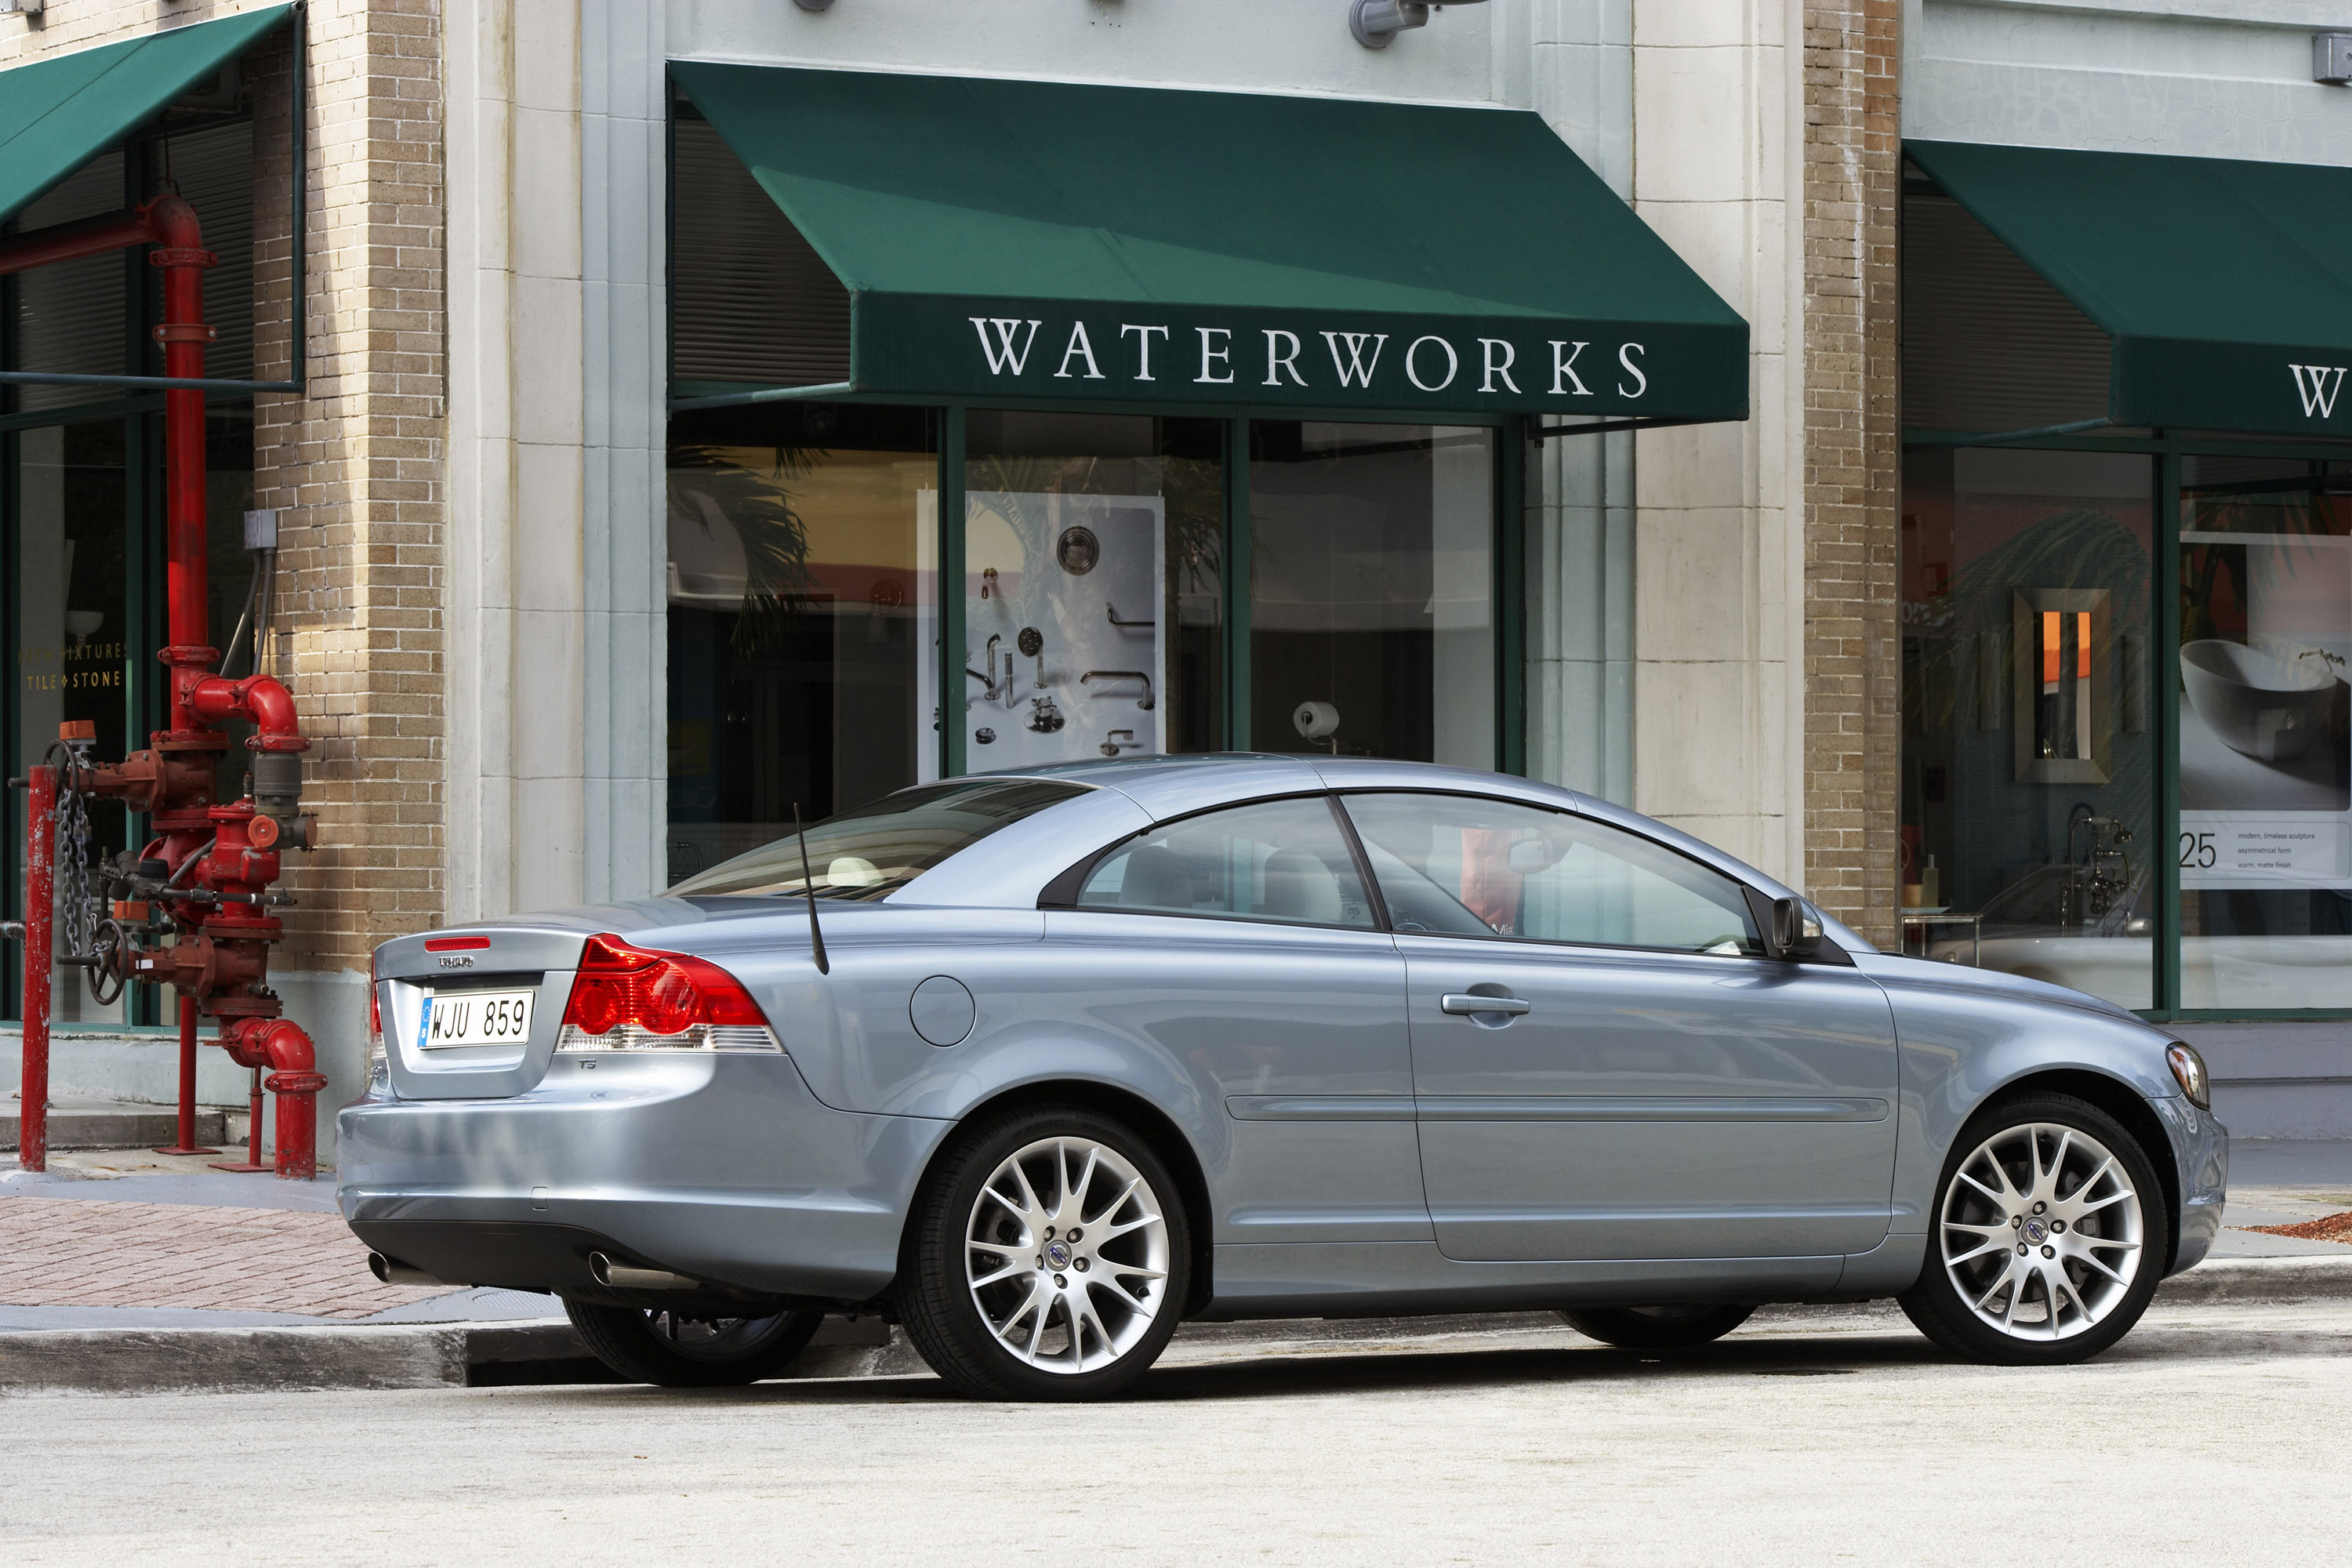 Volvo C70 Coupe and Convertible